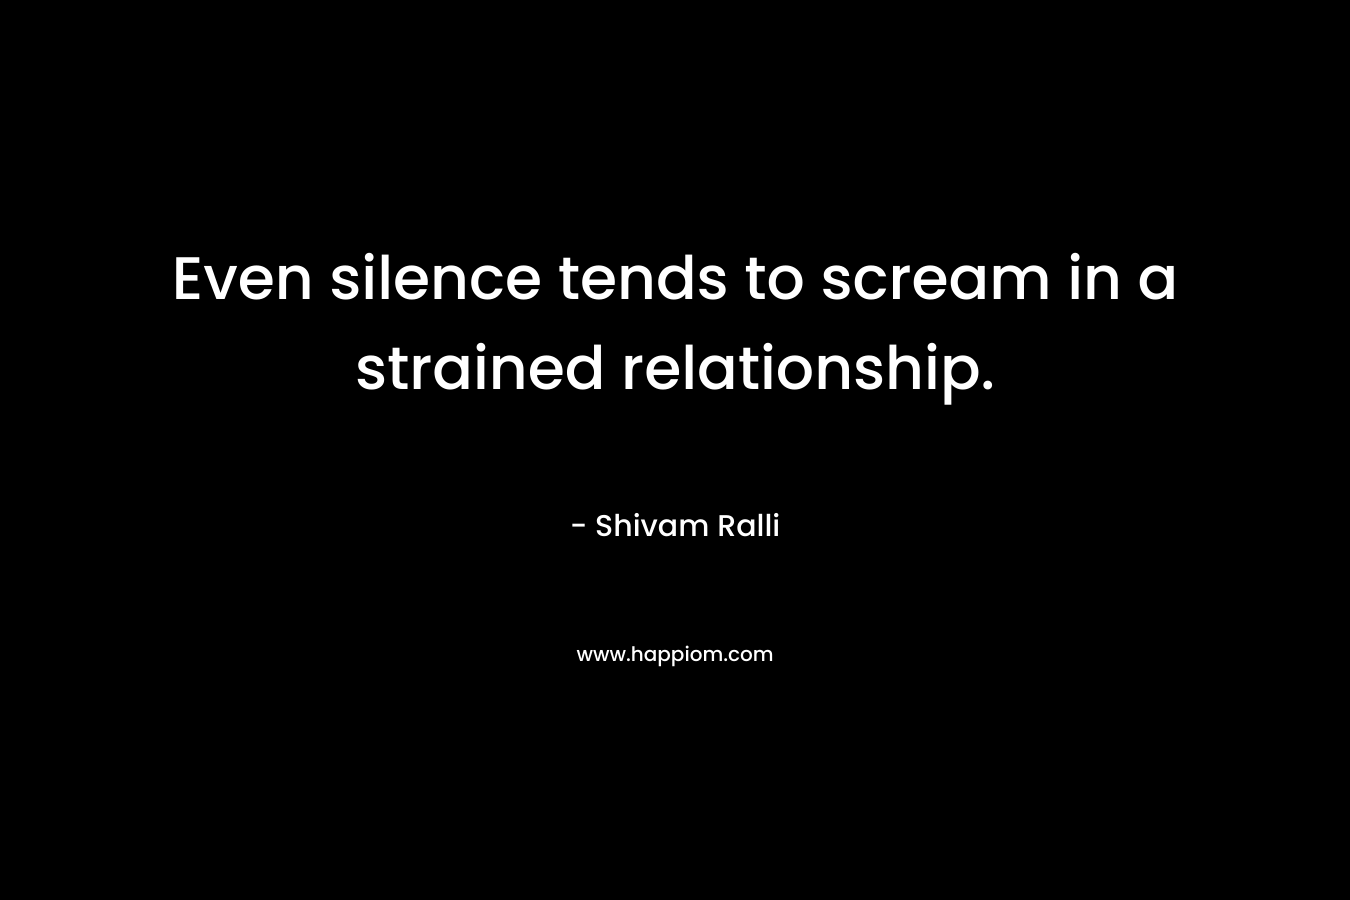 Even silence tends to scream in a strained relationship. – Shivam Ralli